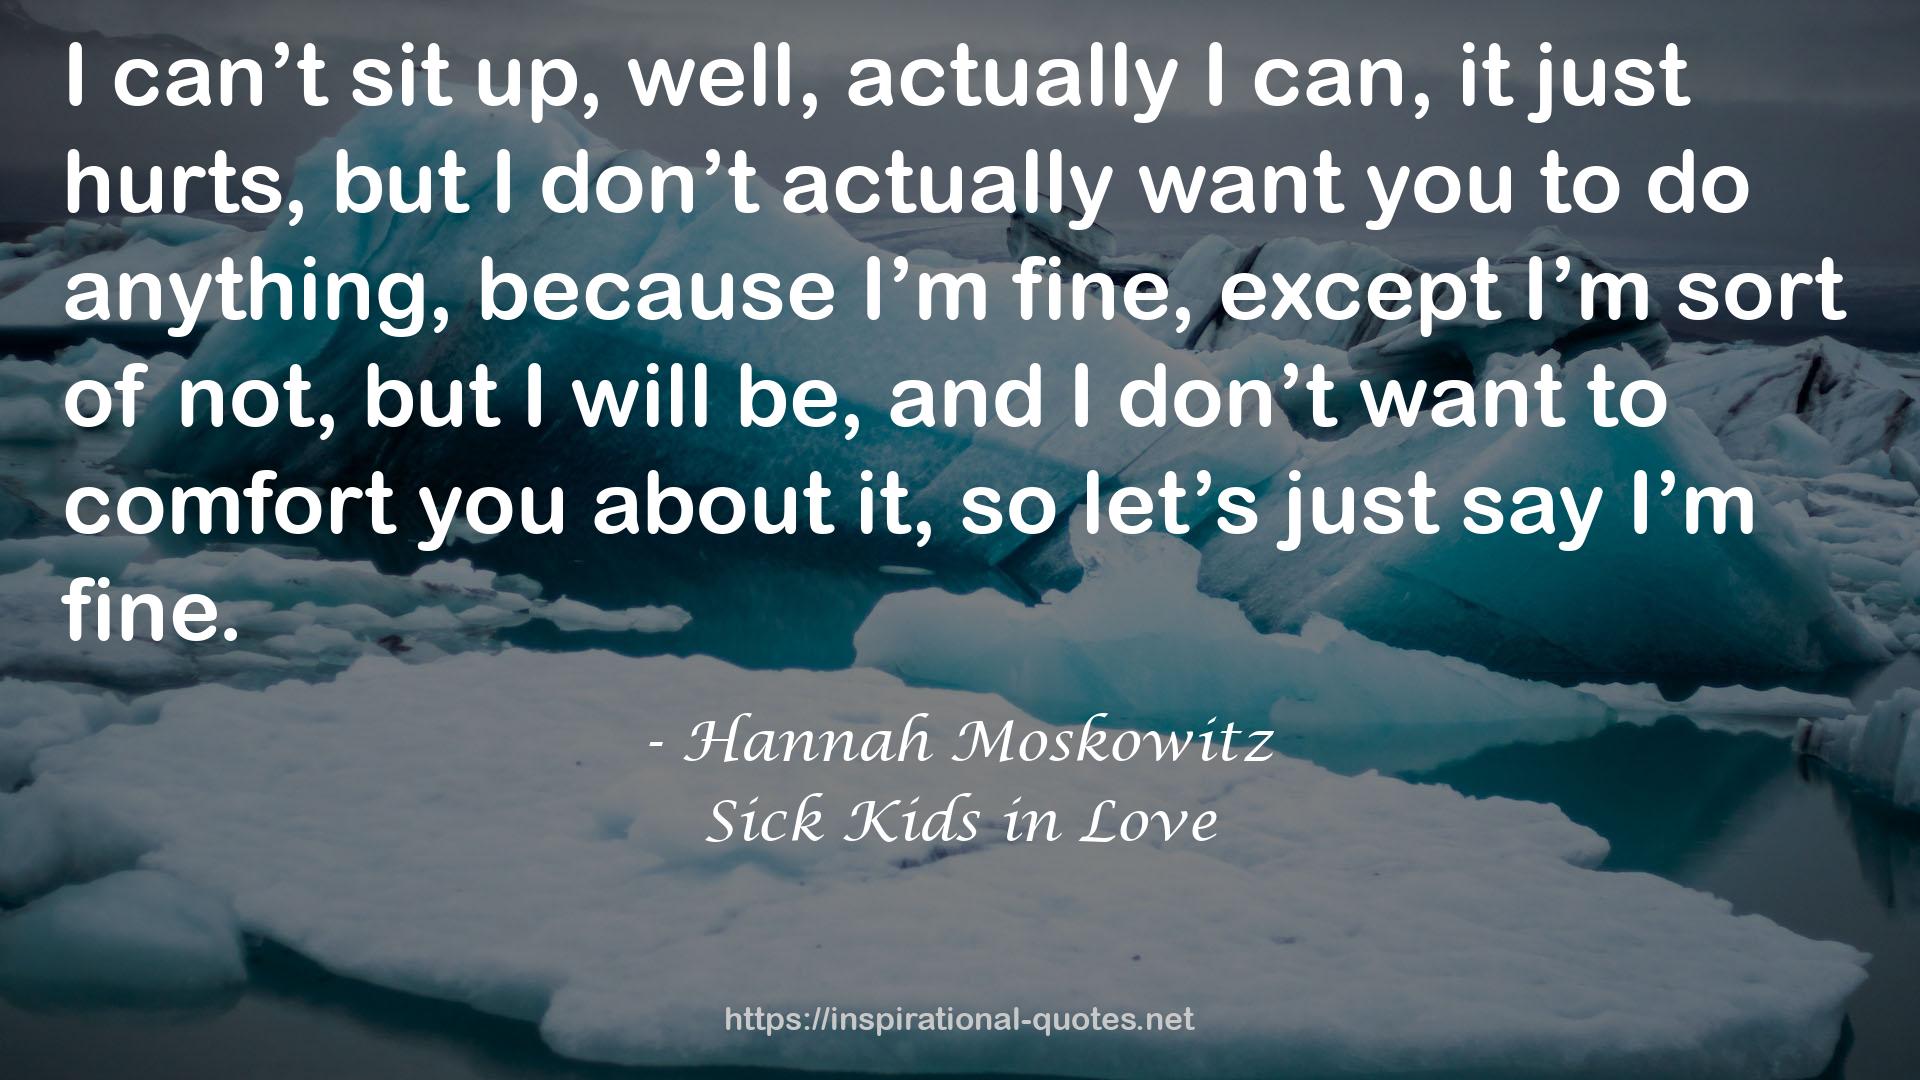 Sick Kids in Love QUOTES